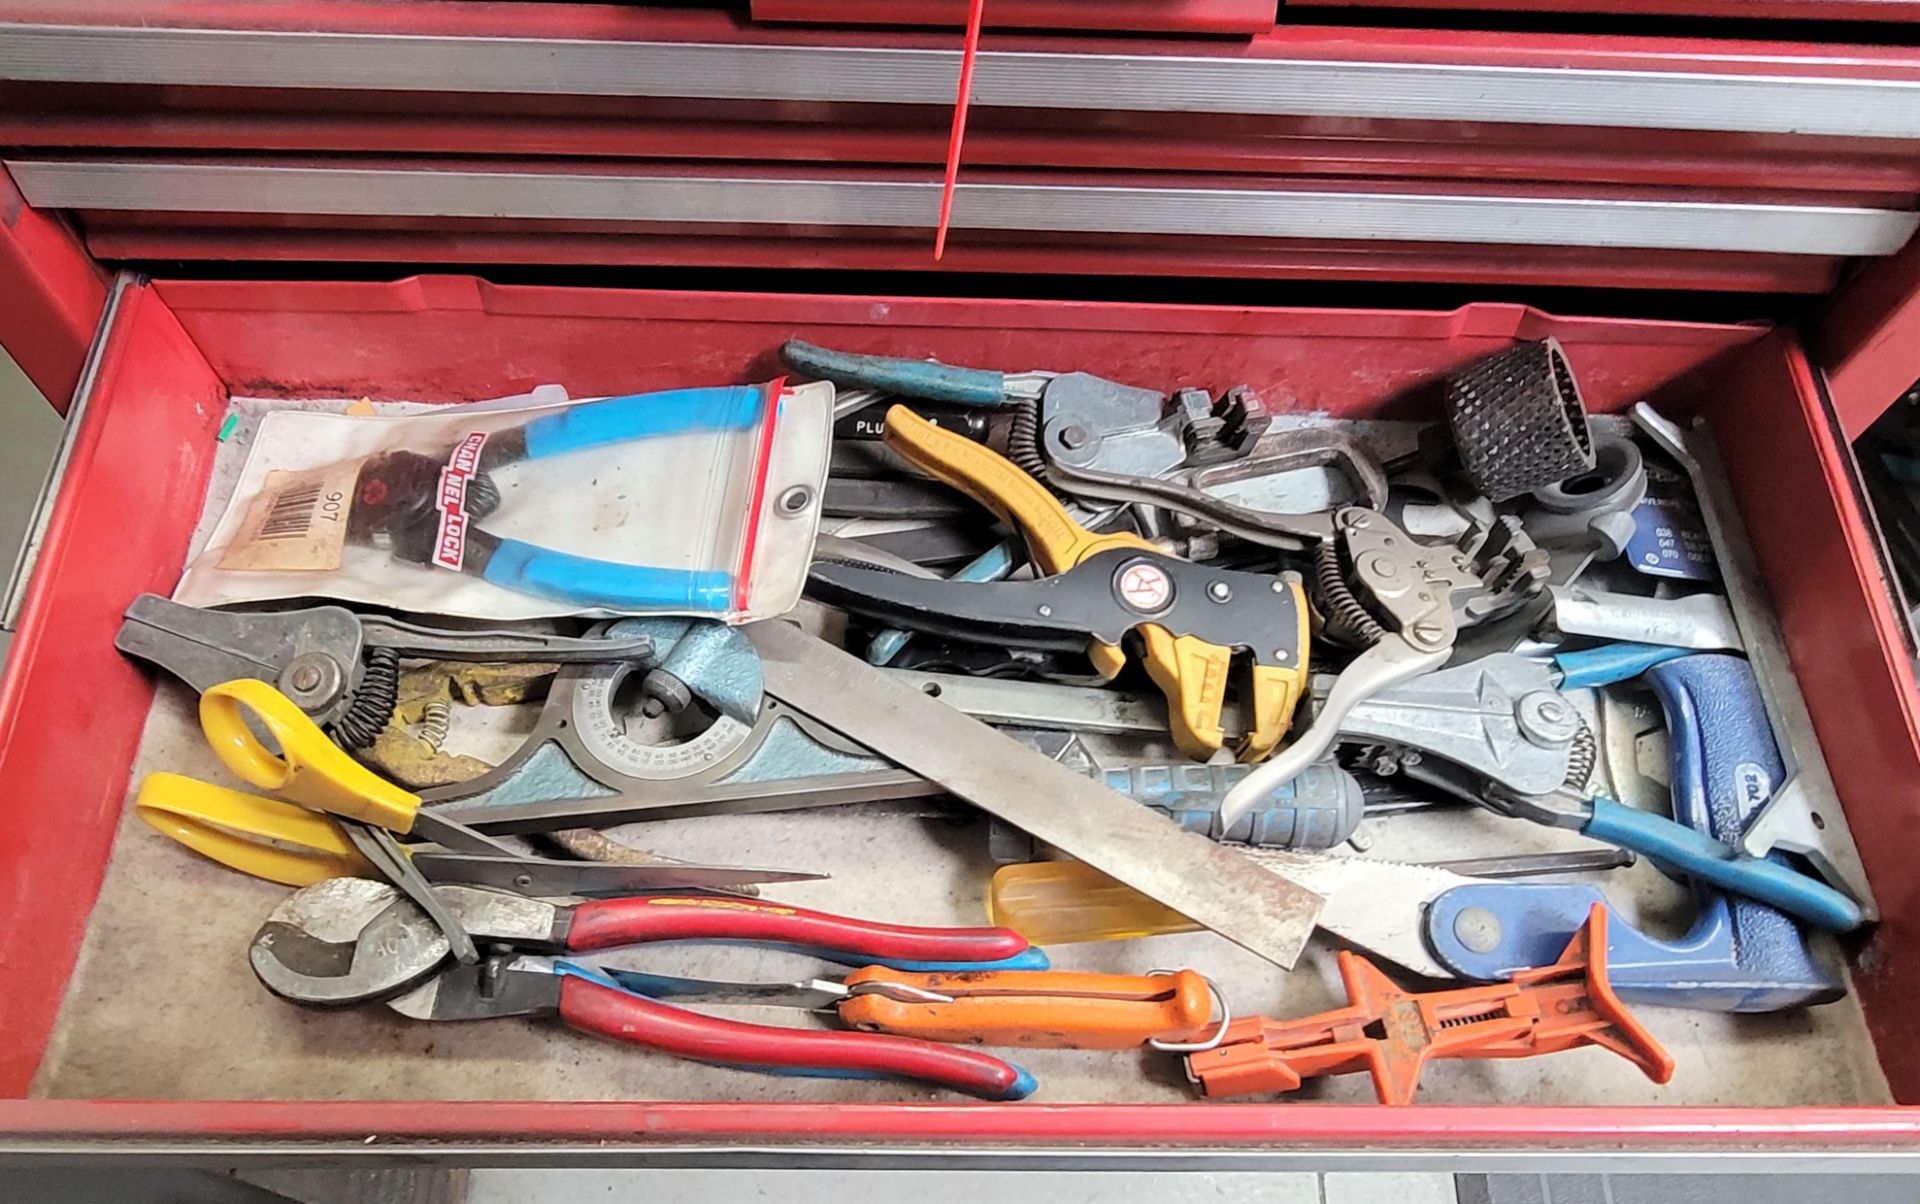 CRAFTSMAN 65418 TOP TOOL BOX, W/ CONTENTS OF ASSORTED HAND TOOLS - Image 6 of 6